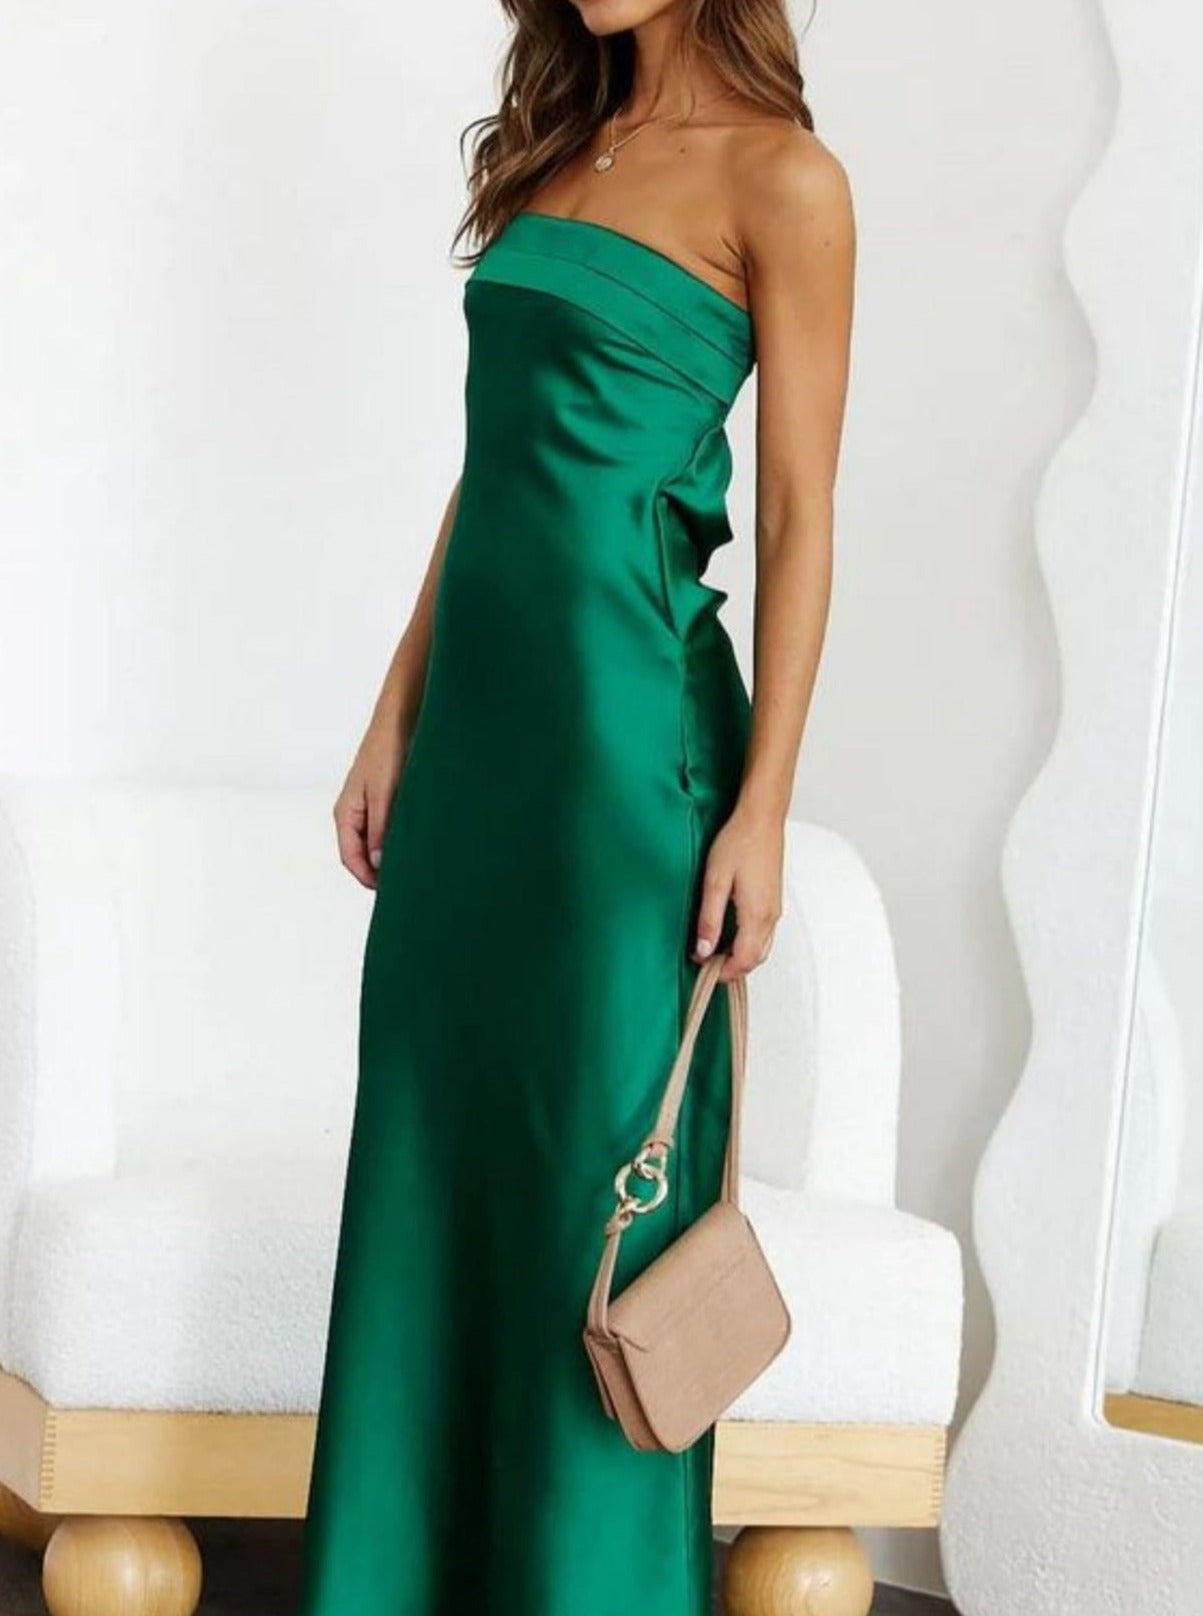 Sexy Solid Color Satin Tube Dress